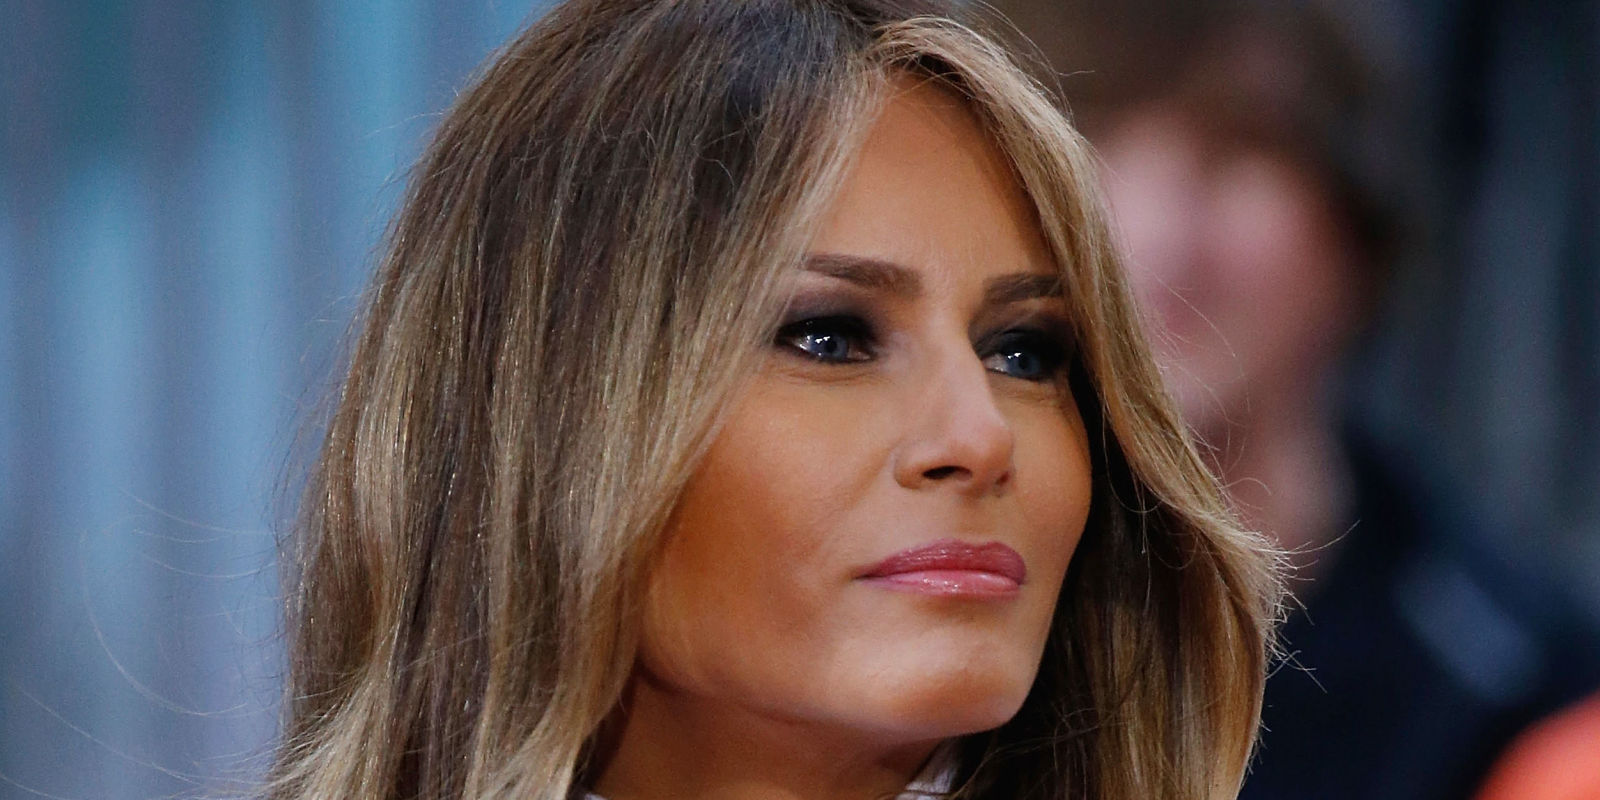 Melania...On Wednesday, The Huffington Post noticed that the site had been entirely scrubbed of its content. People clicking on its address are now redirected to the Trump Organization’s website.